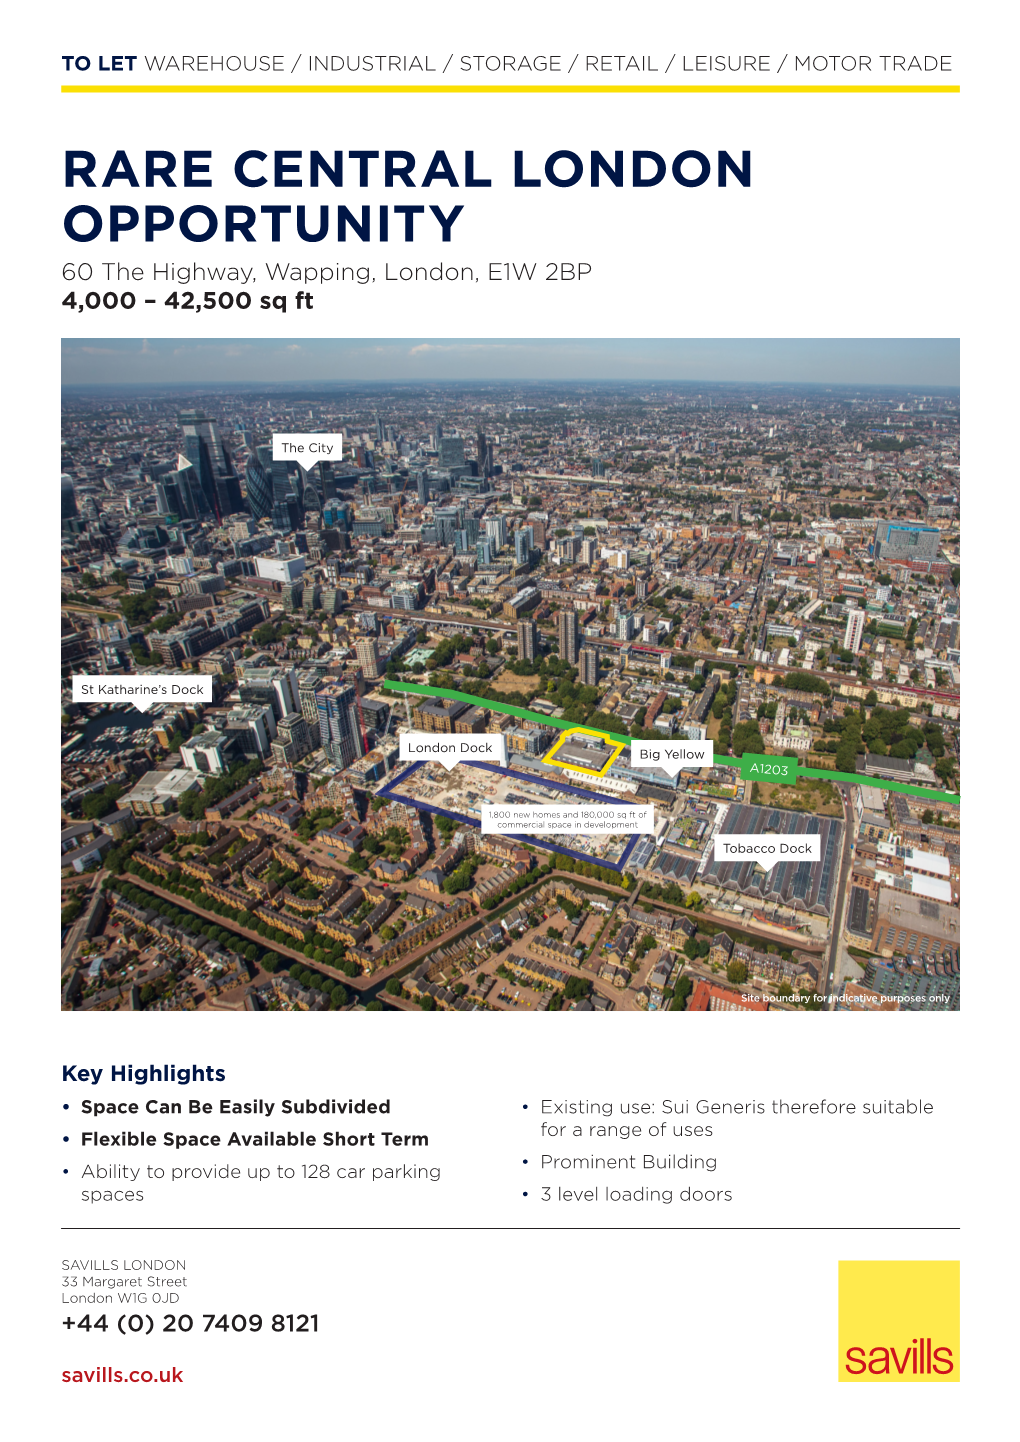 RARE CENTRAL LONDON OPPORTUNITY 60 the Highway, Wapping, London, E1W 2BP 4,000 – 42,500 Sq Ft